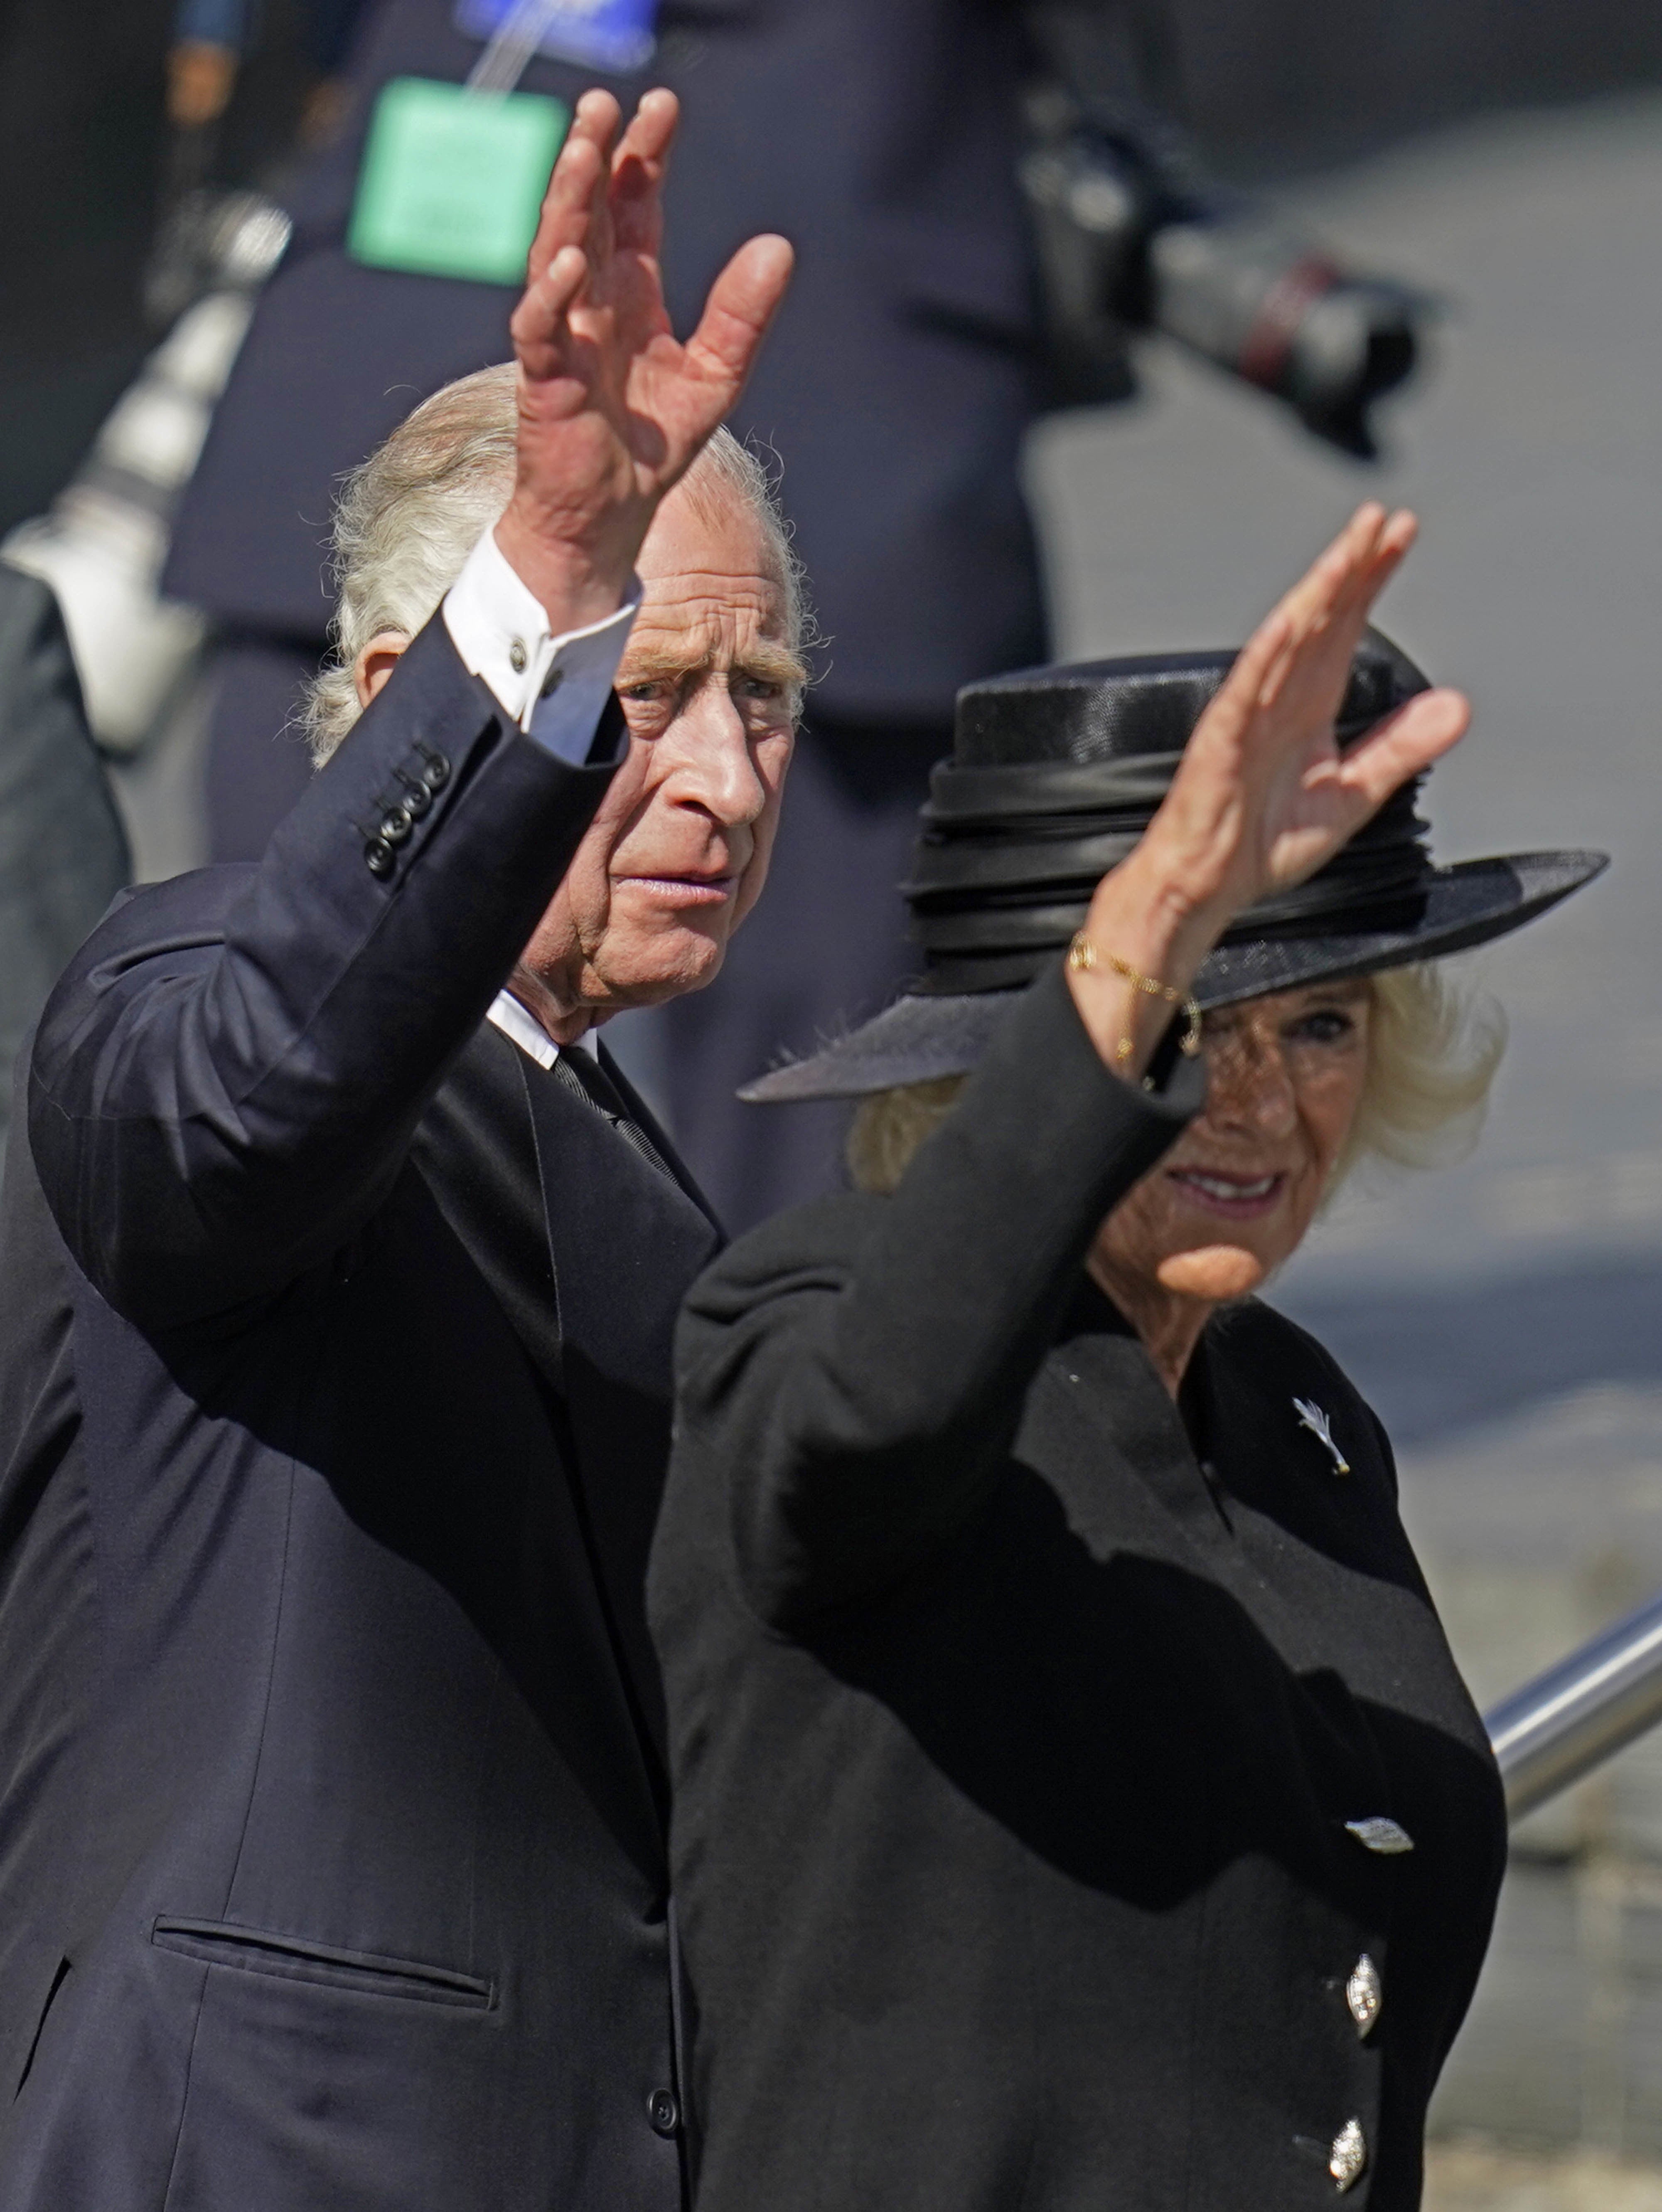 The King and the Queen Consort leave the Senedd in Cardiff (Andrew Matthews/PA)